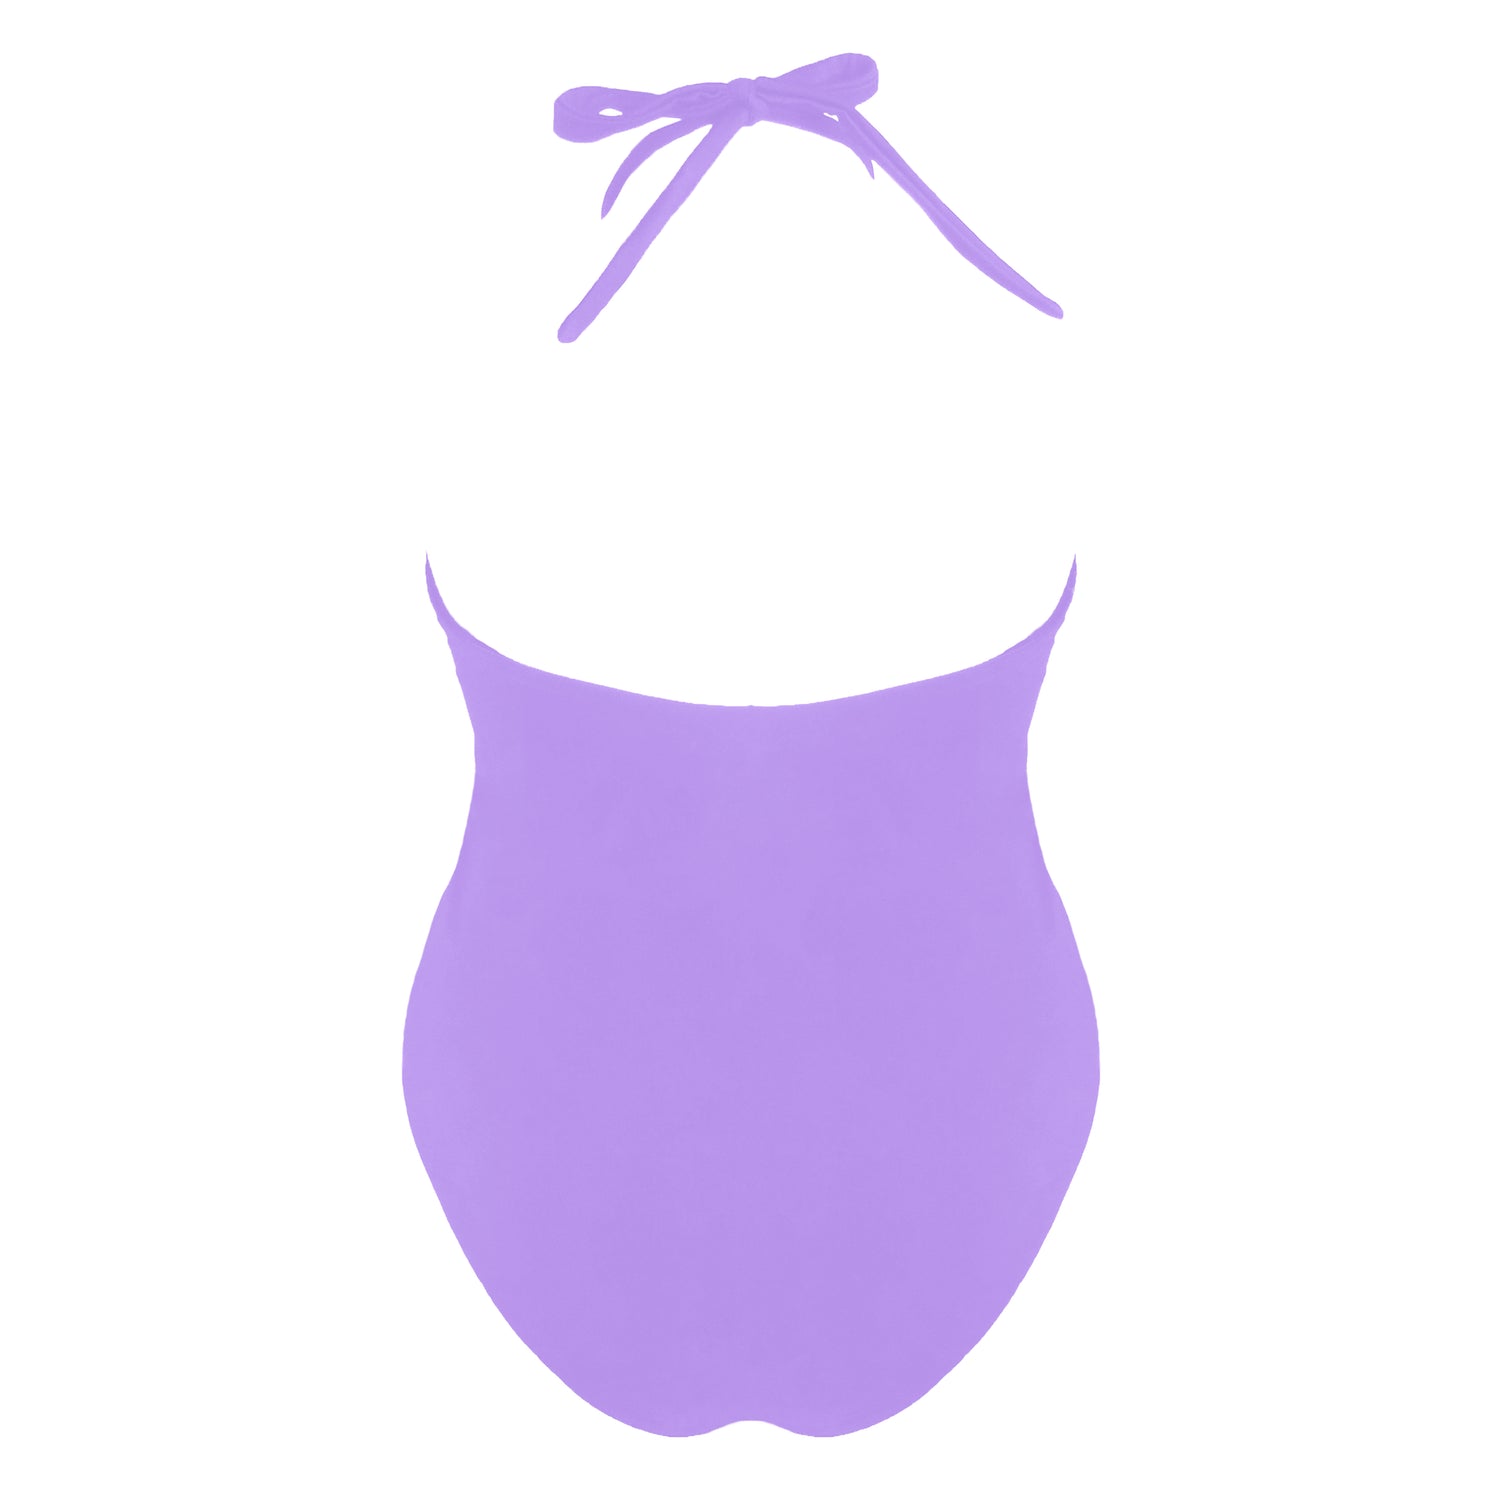 Back view of pastel purple elevated halter one piece swimsuit with versatile cross front tie neck straps, keyhole neckline, high cut legs and full coverage.